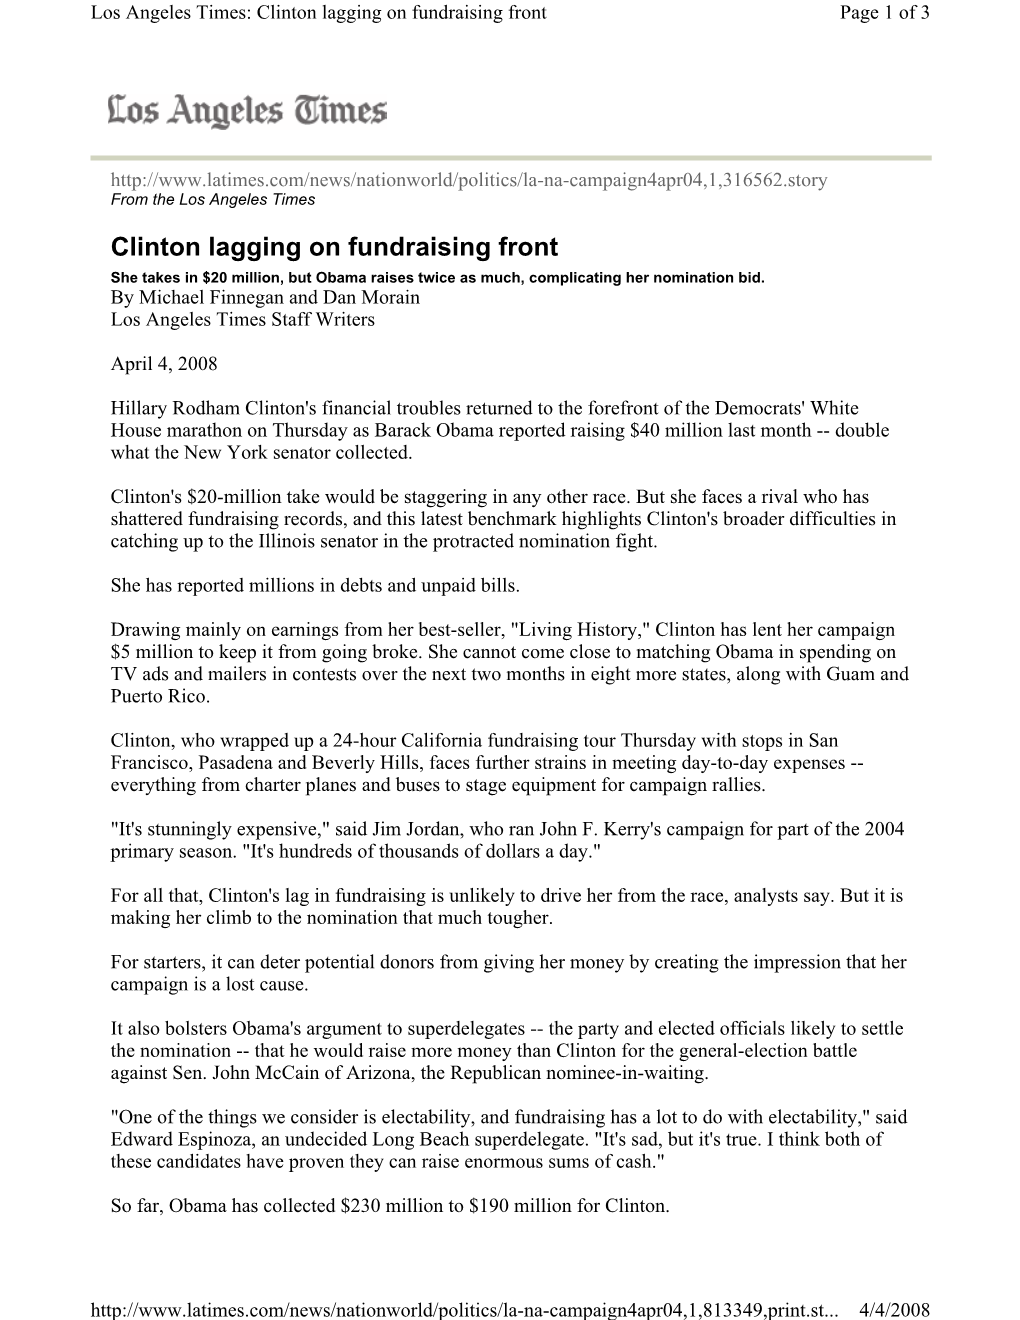 Clinton Lagging on Fundraising Front Page 1 of 3